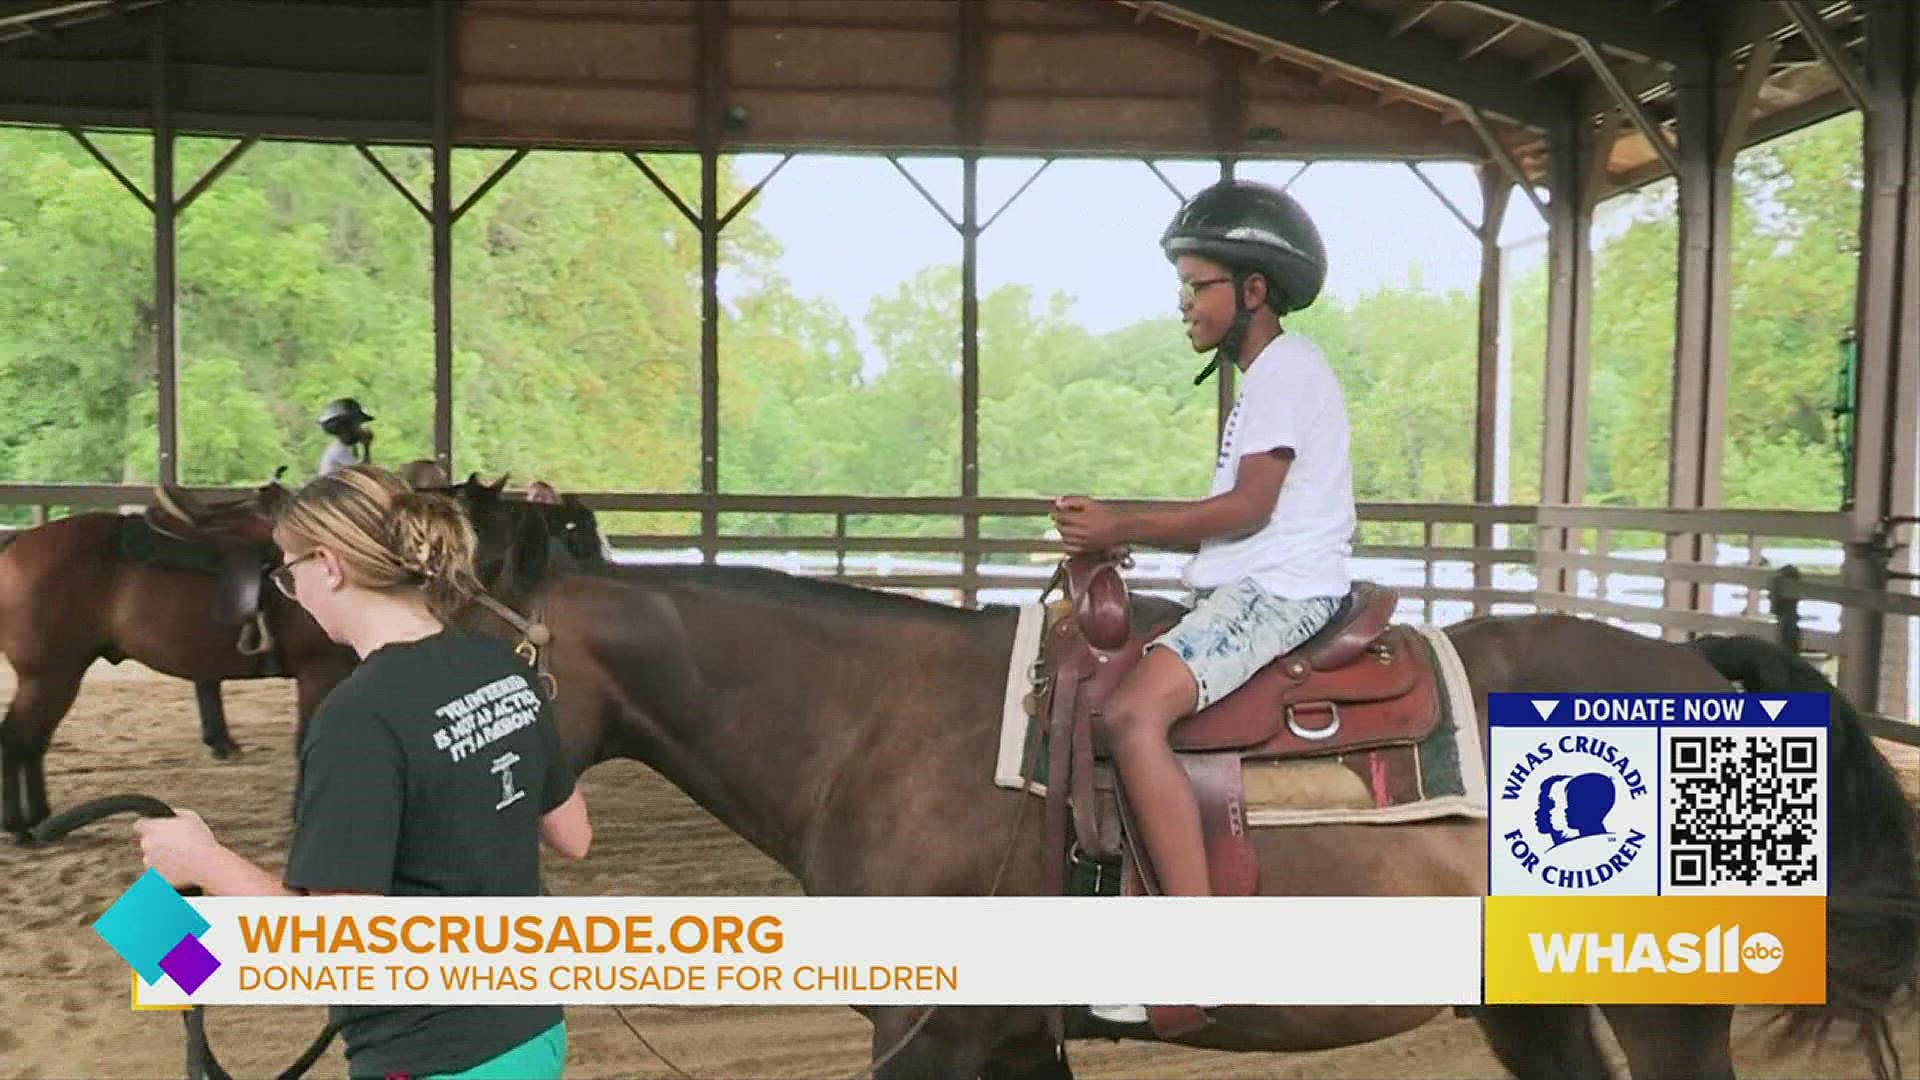 WHAS' Crusade for Children returns with live performances and firefighters after 2 years